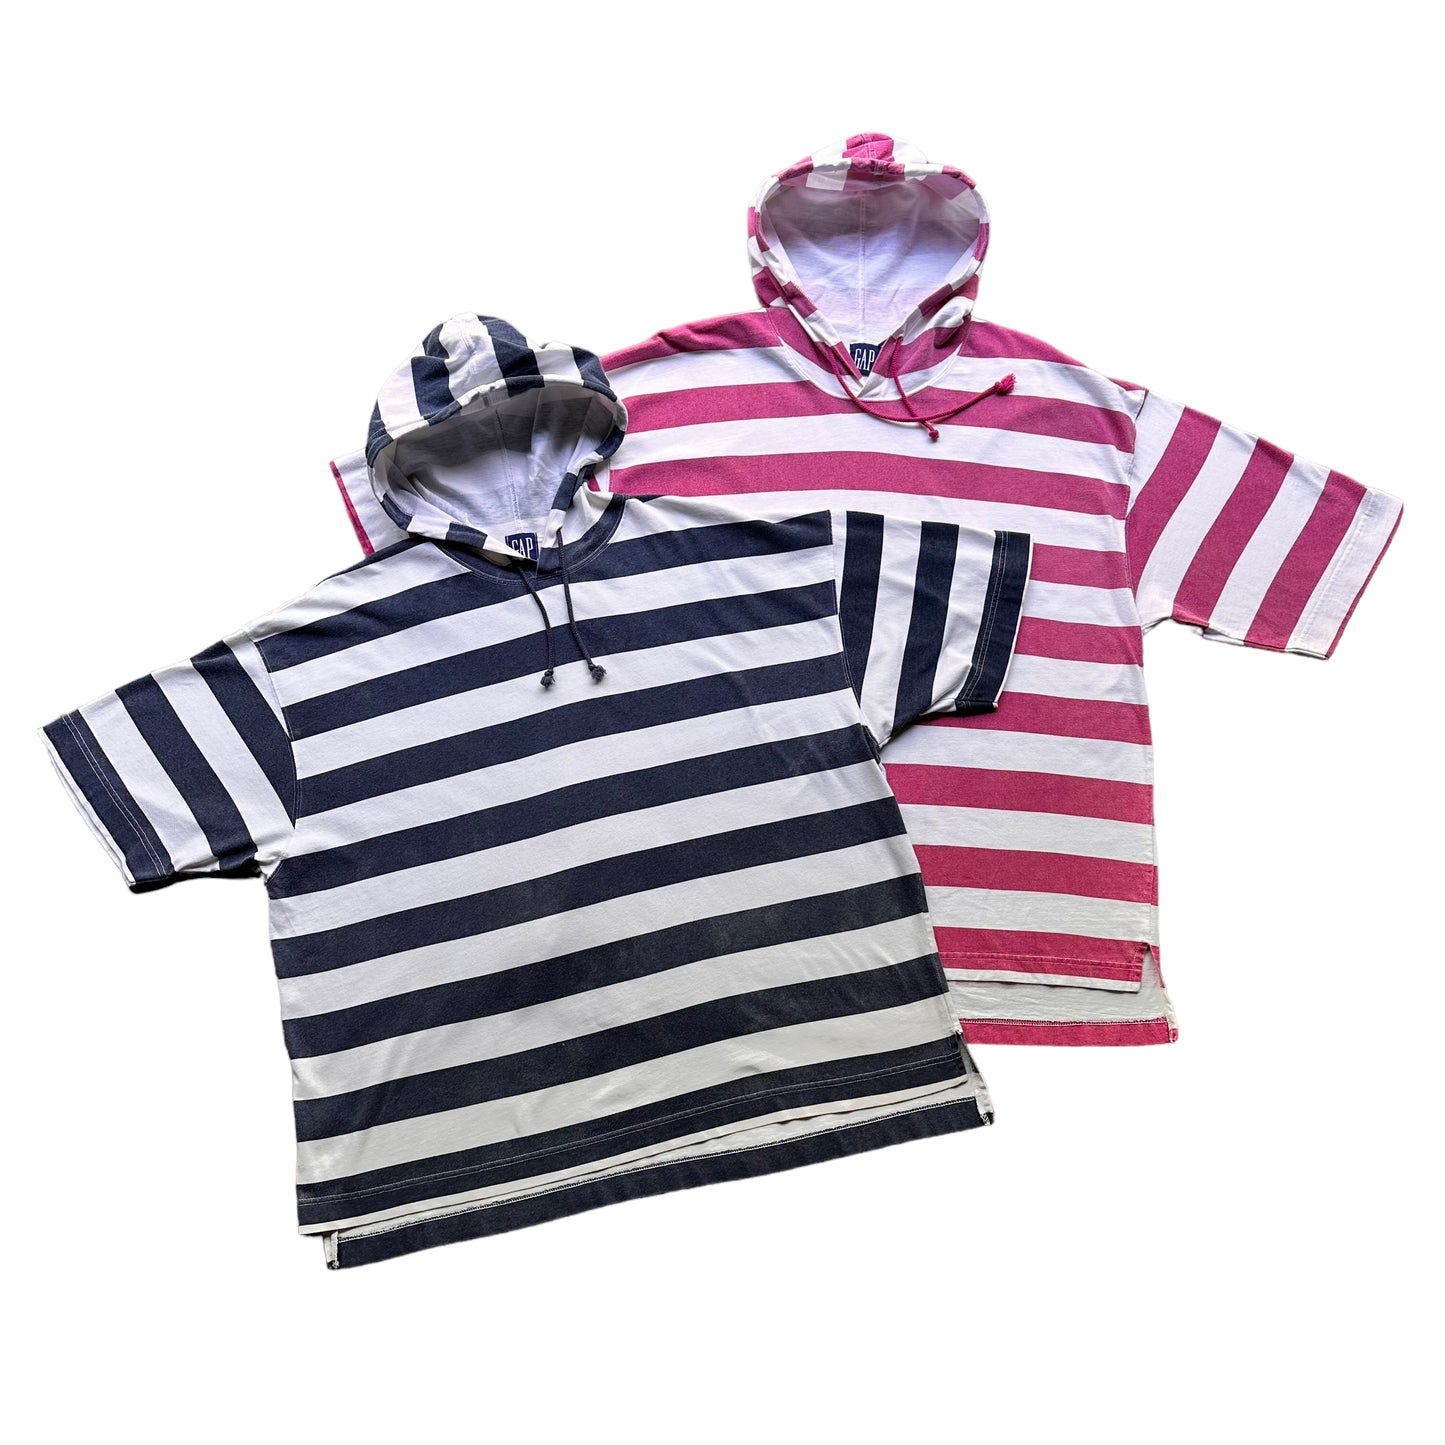 90s Gap striped hooded tee - Large & Extra Large